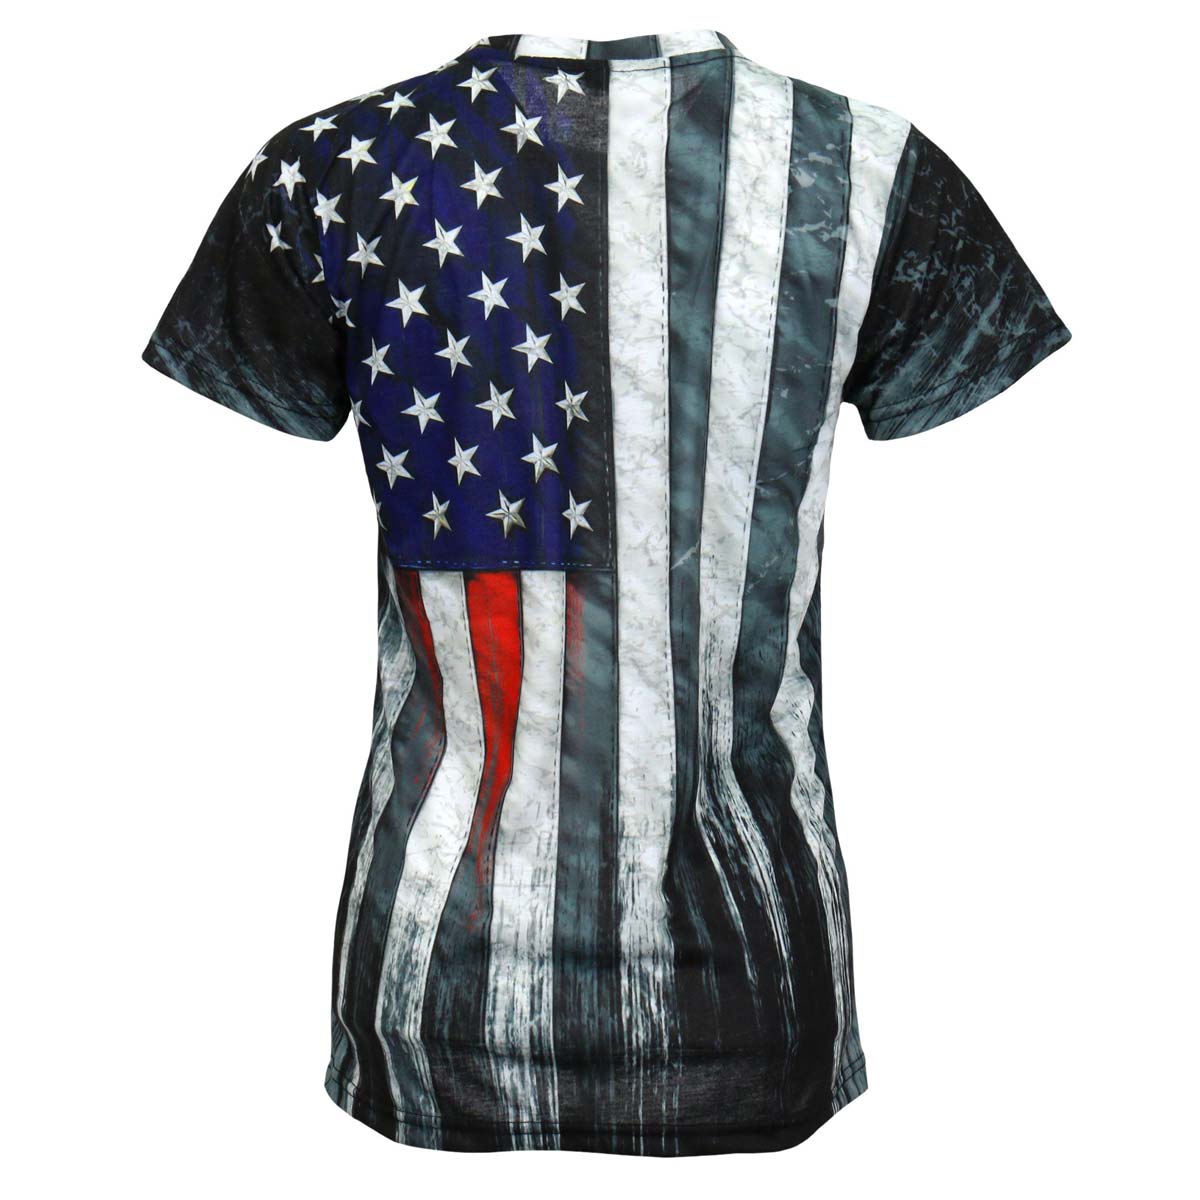 Hot Leathers Ladies Heartbeat Flag Fitted Short Sleeve 3D All Over Printed T-Shirt GLS1005